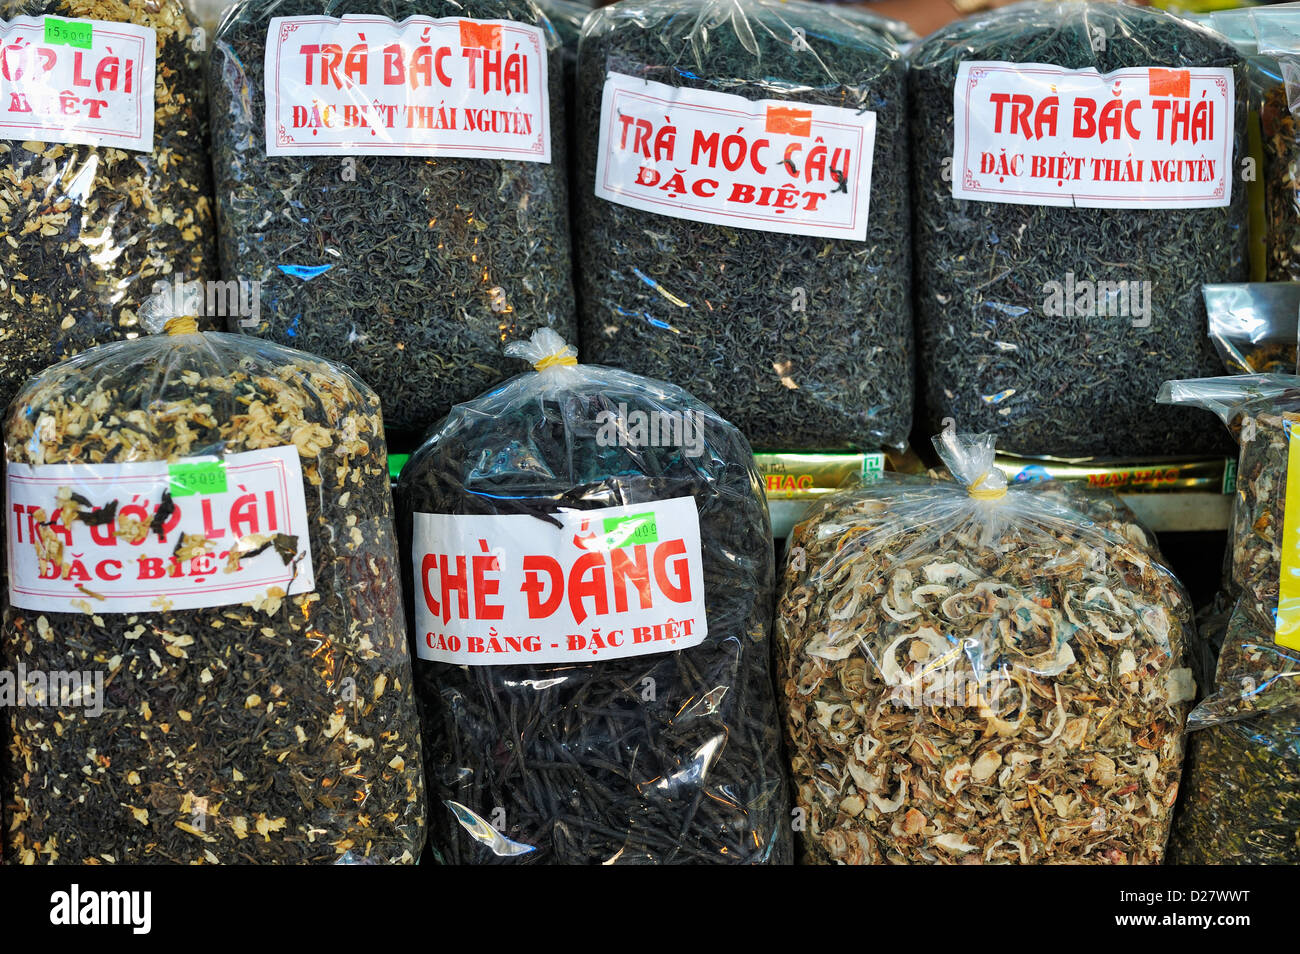 Bags of dried food (leaves and spices), Hue, Vietnam Stock Photo